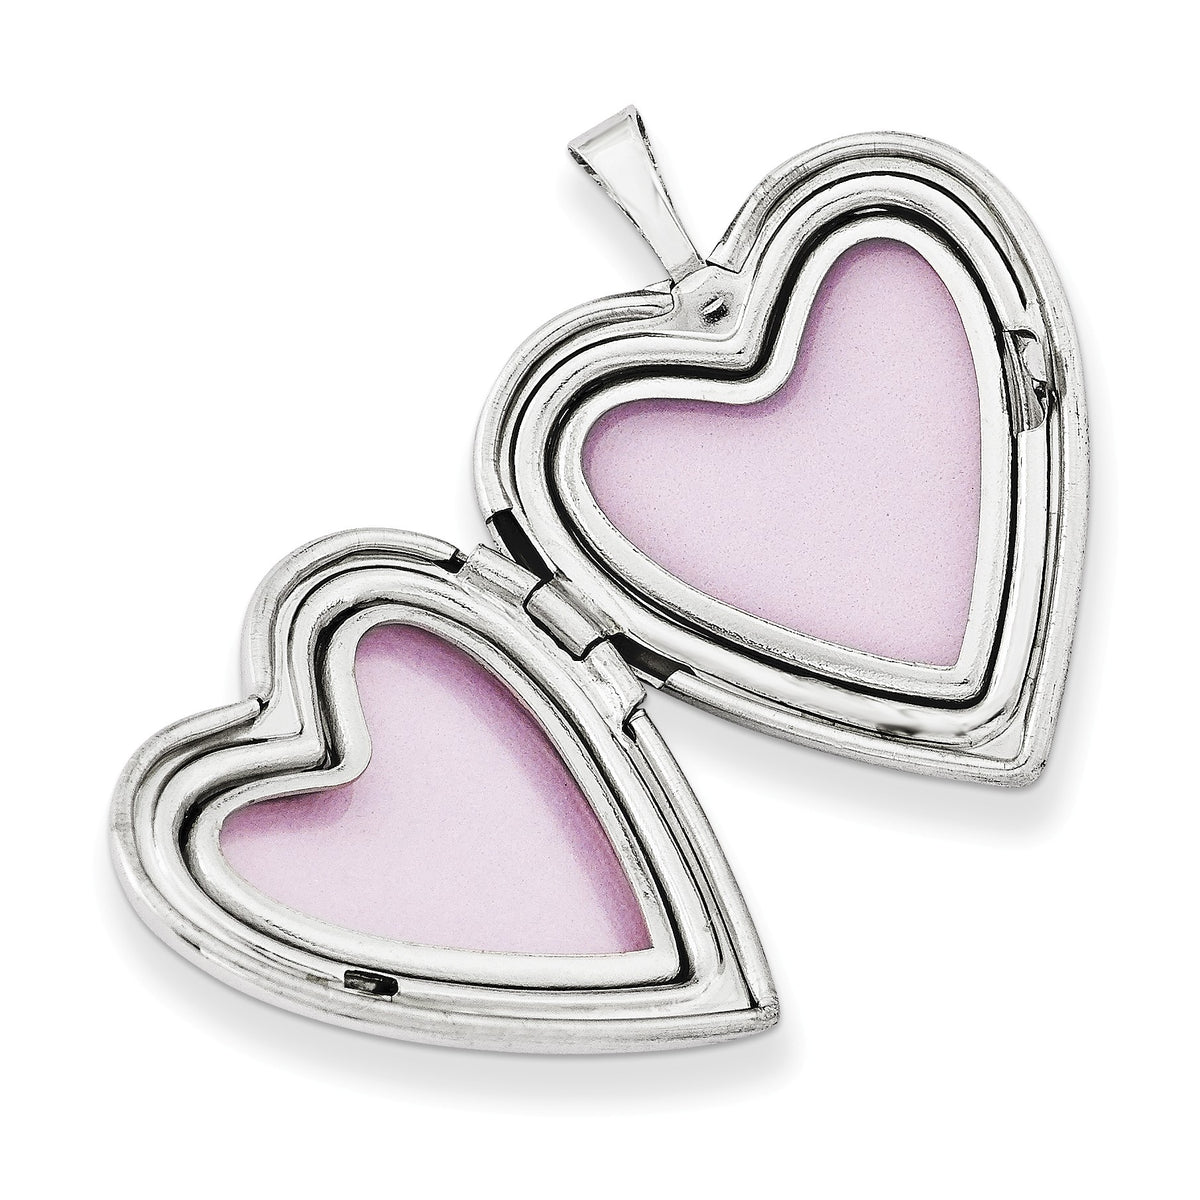 Alternate view of the Sterling Silver and Enamel 20mm Rose Heart Locket by The Black Bow Jewelry Co.